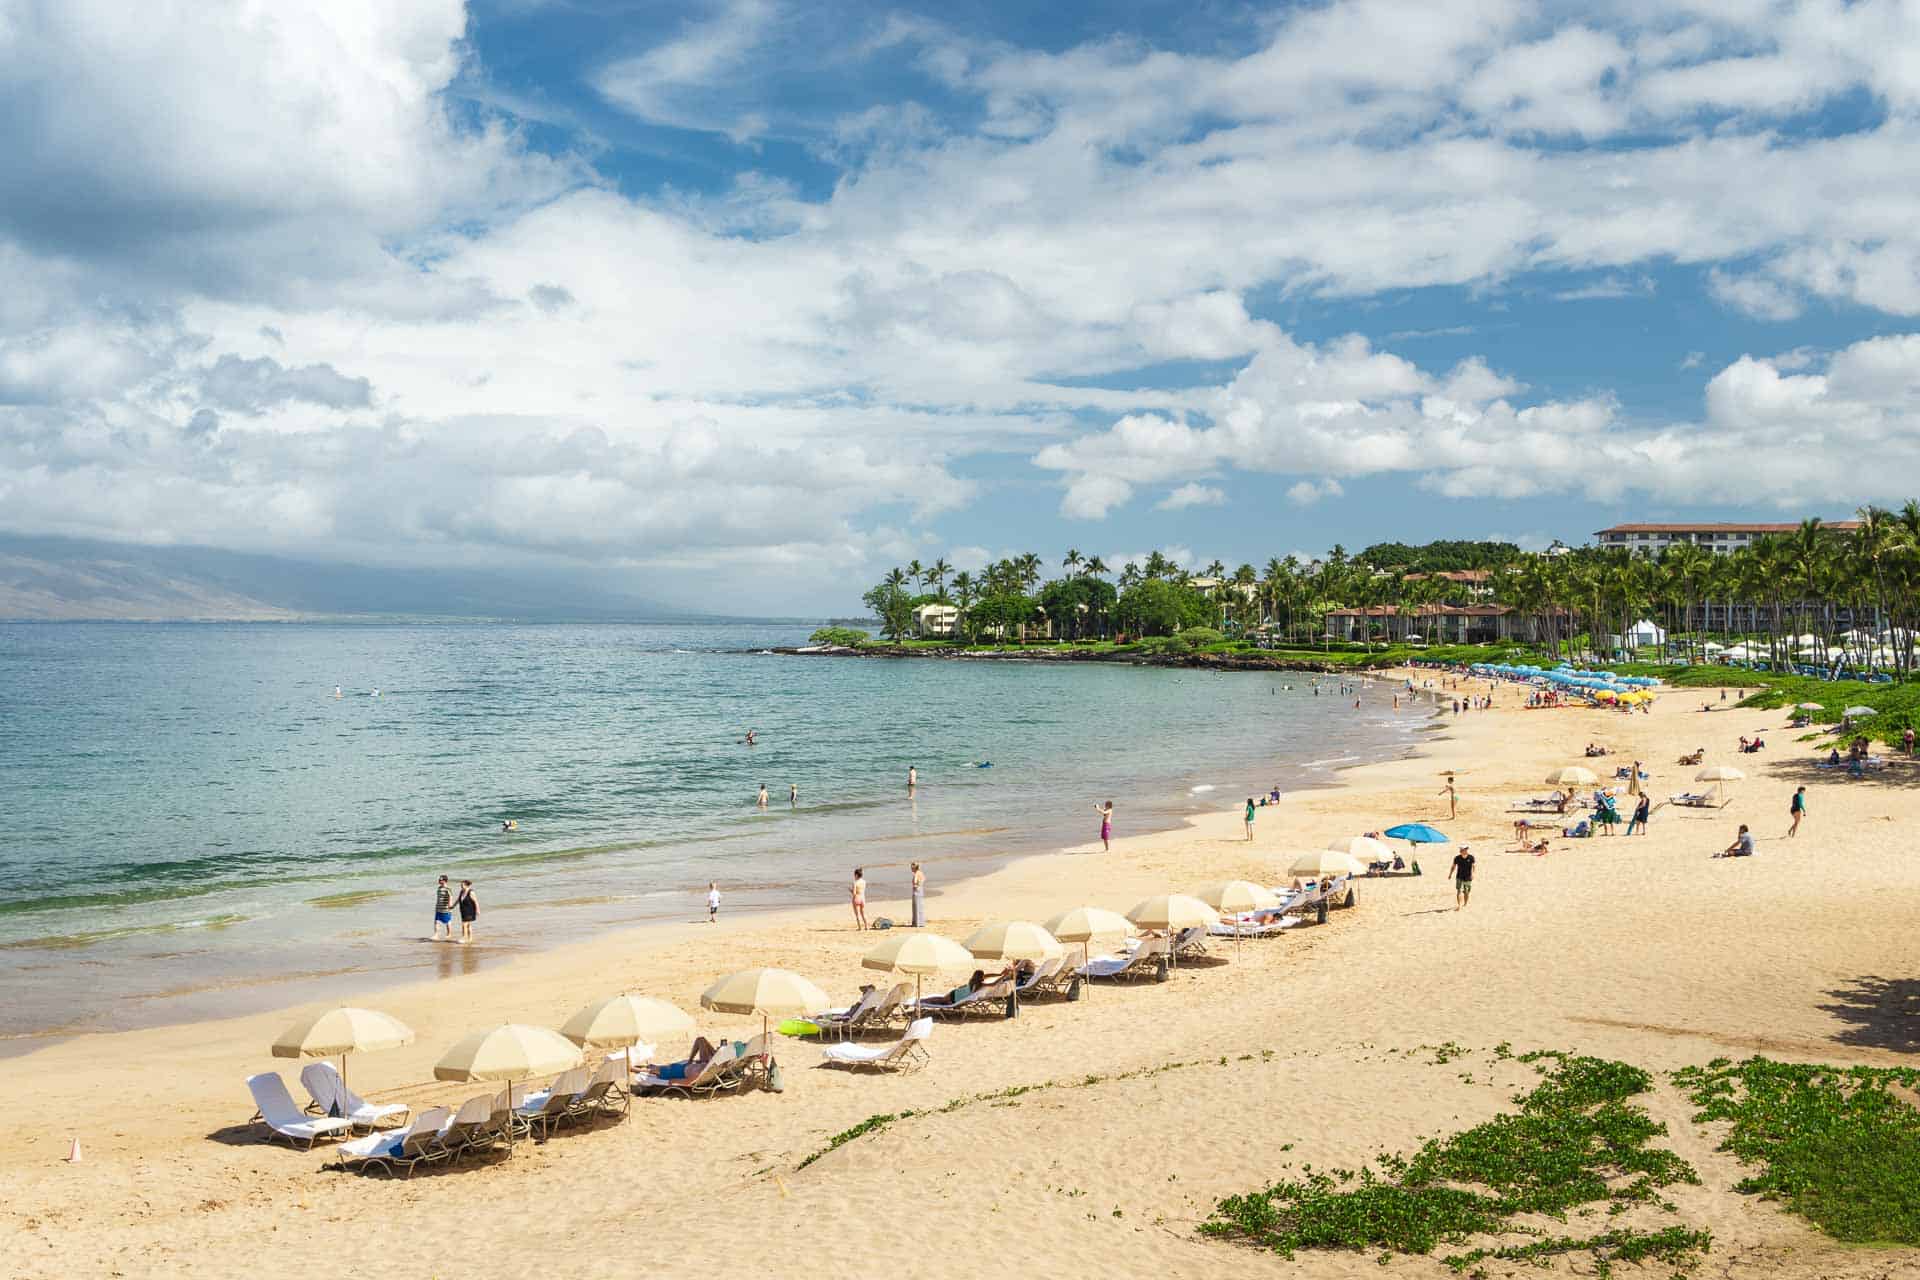 Where to stay in Hawaii Maui